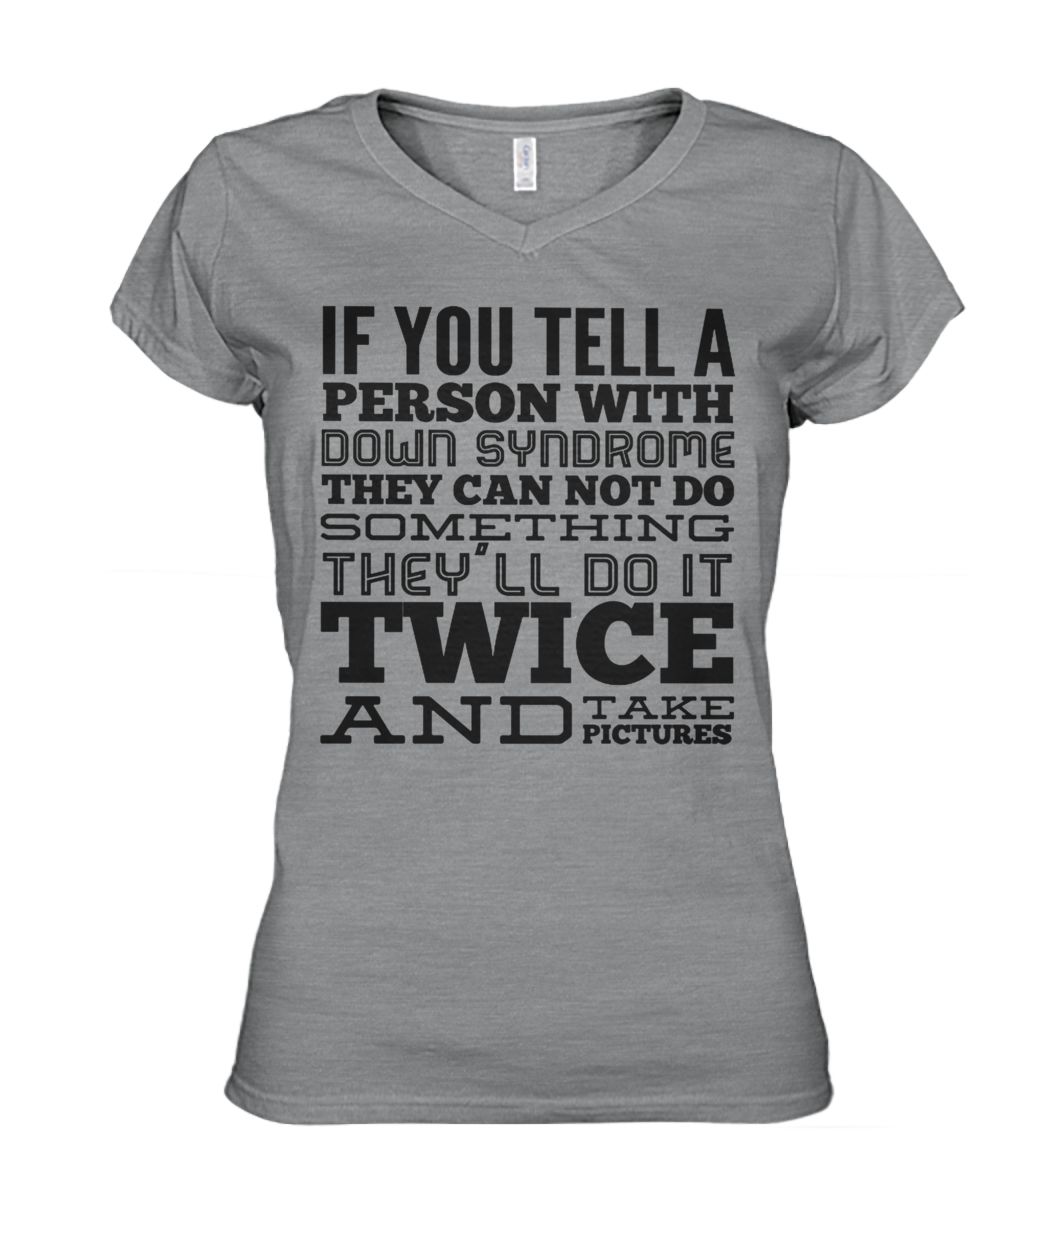 If you tell a person with down syndrome they can not do something women's v-neck